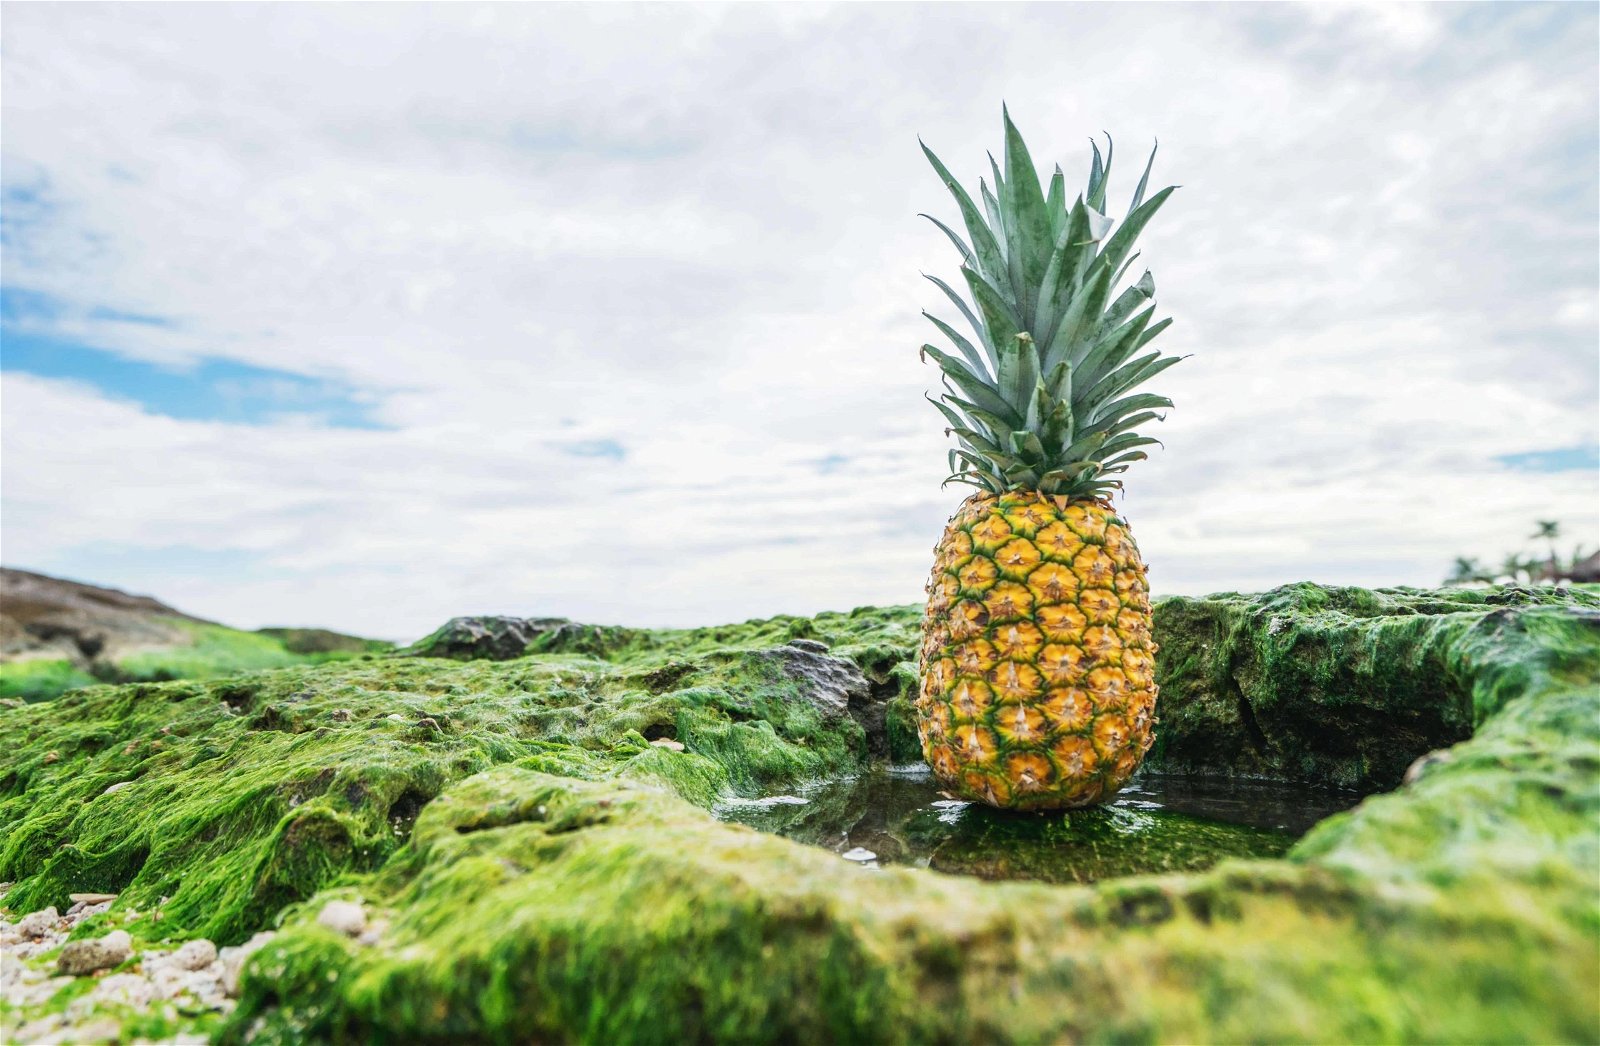 Natural light as seen in this image of a pineapple outside, is preferred by most food photographers